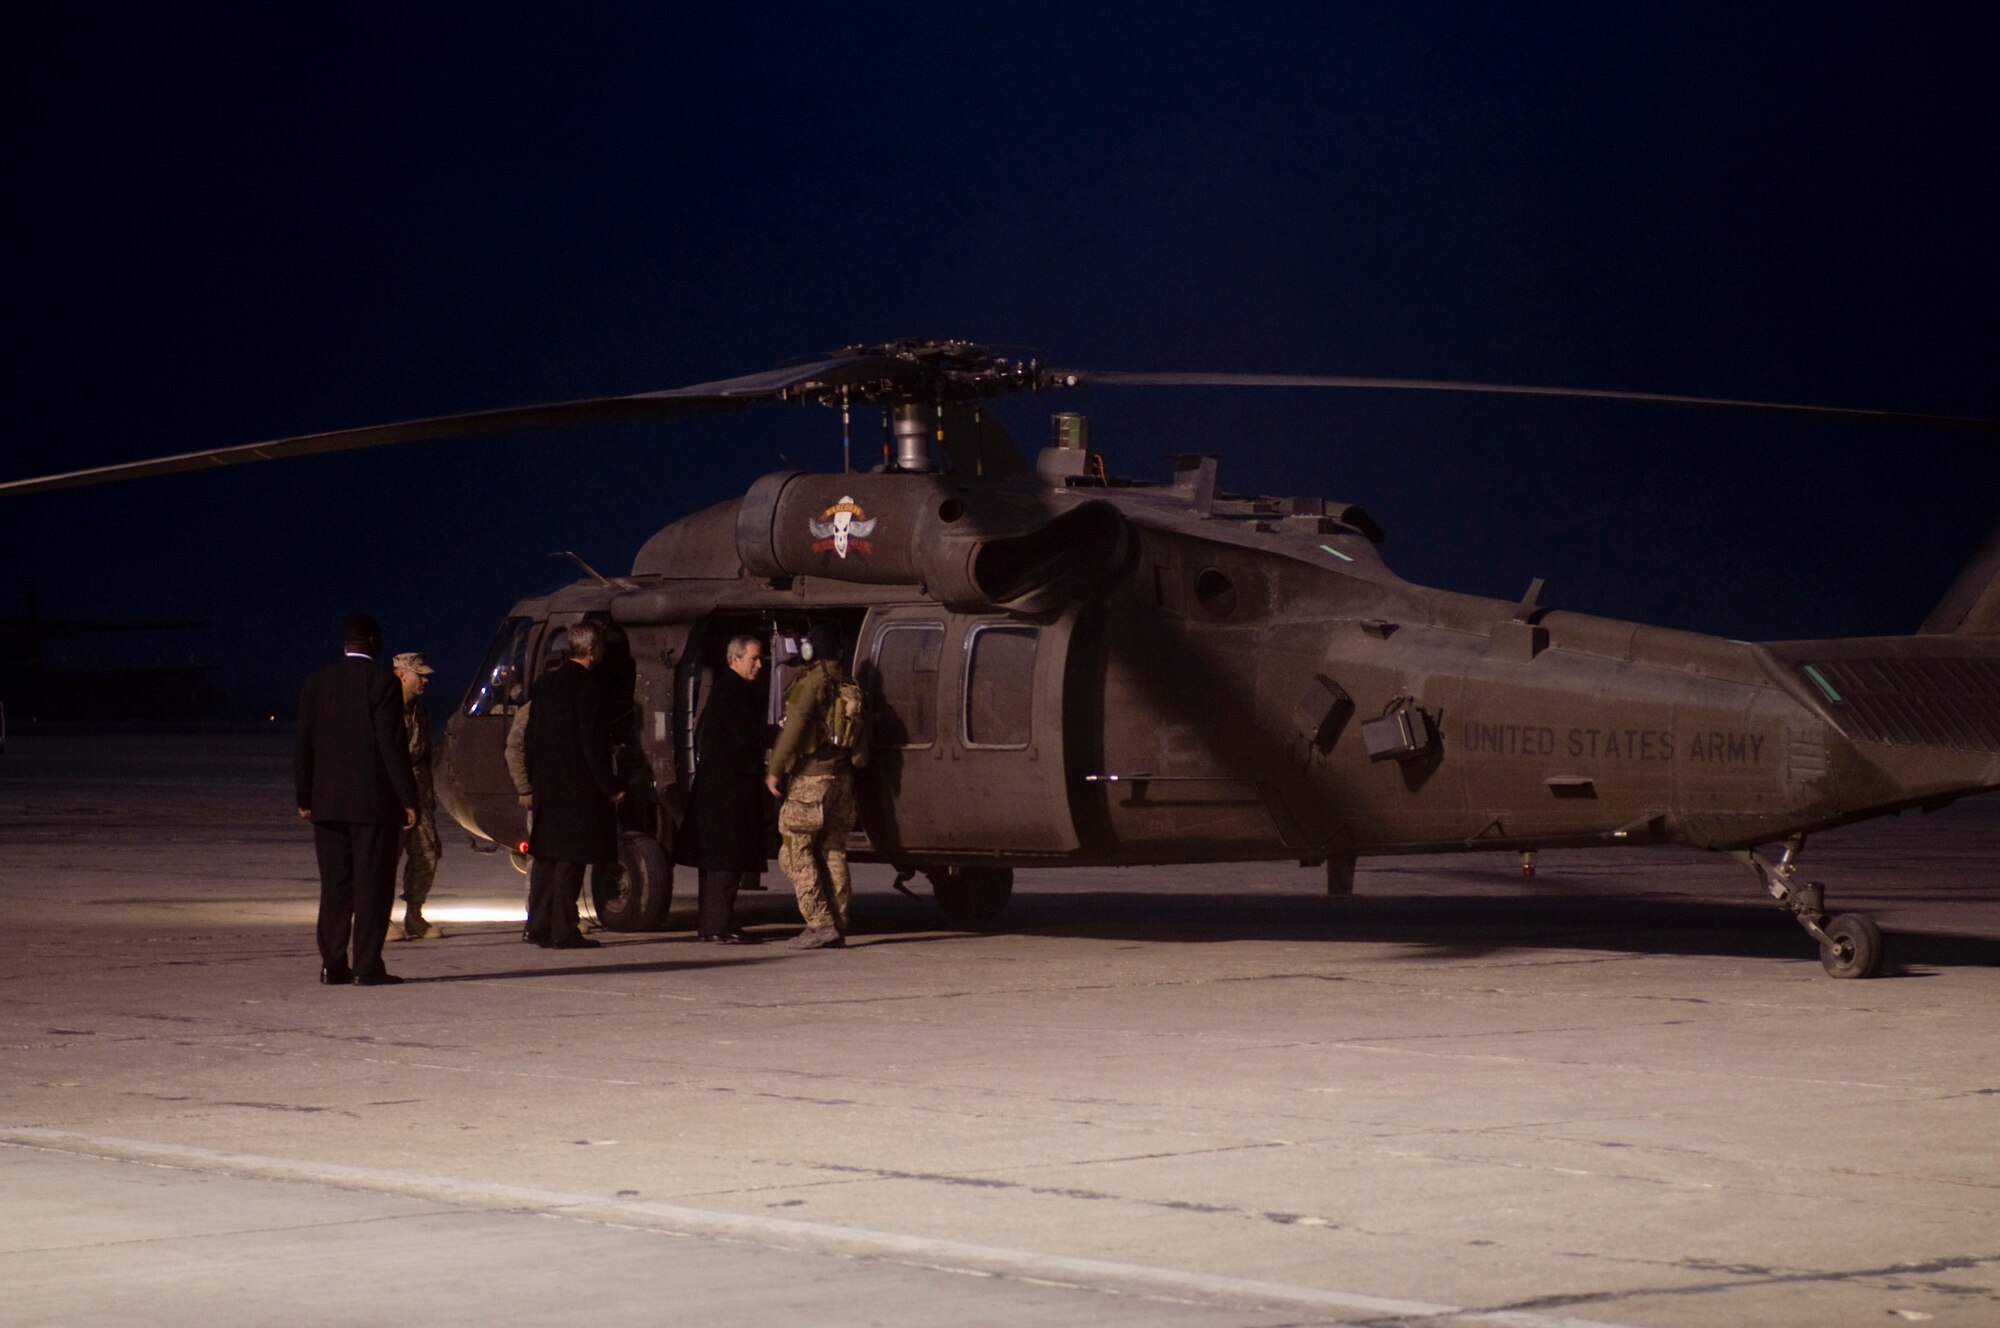 President George W. Bush boards an Army UH-60 Black Hawk helicopter at Bagram Air Field, Afghanistan, Dec. 15. He took time to shake hands with the crew before boarding. (U.S. Air Force photo by Staff Sgt. Samuel Morse)(Released)